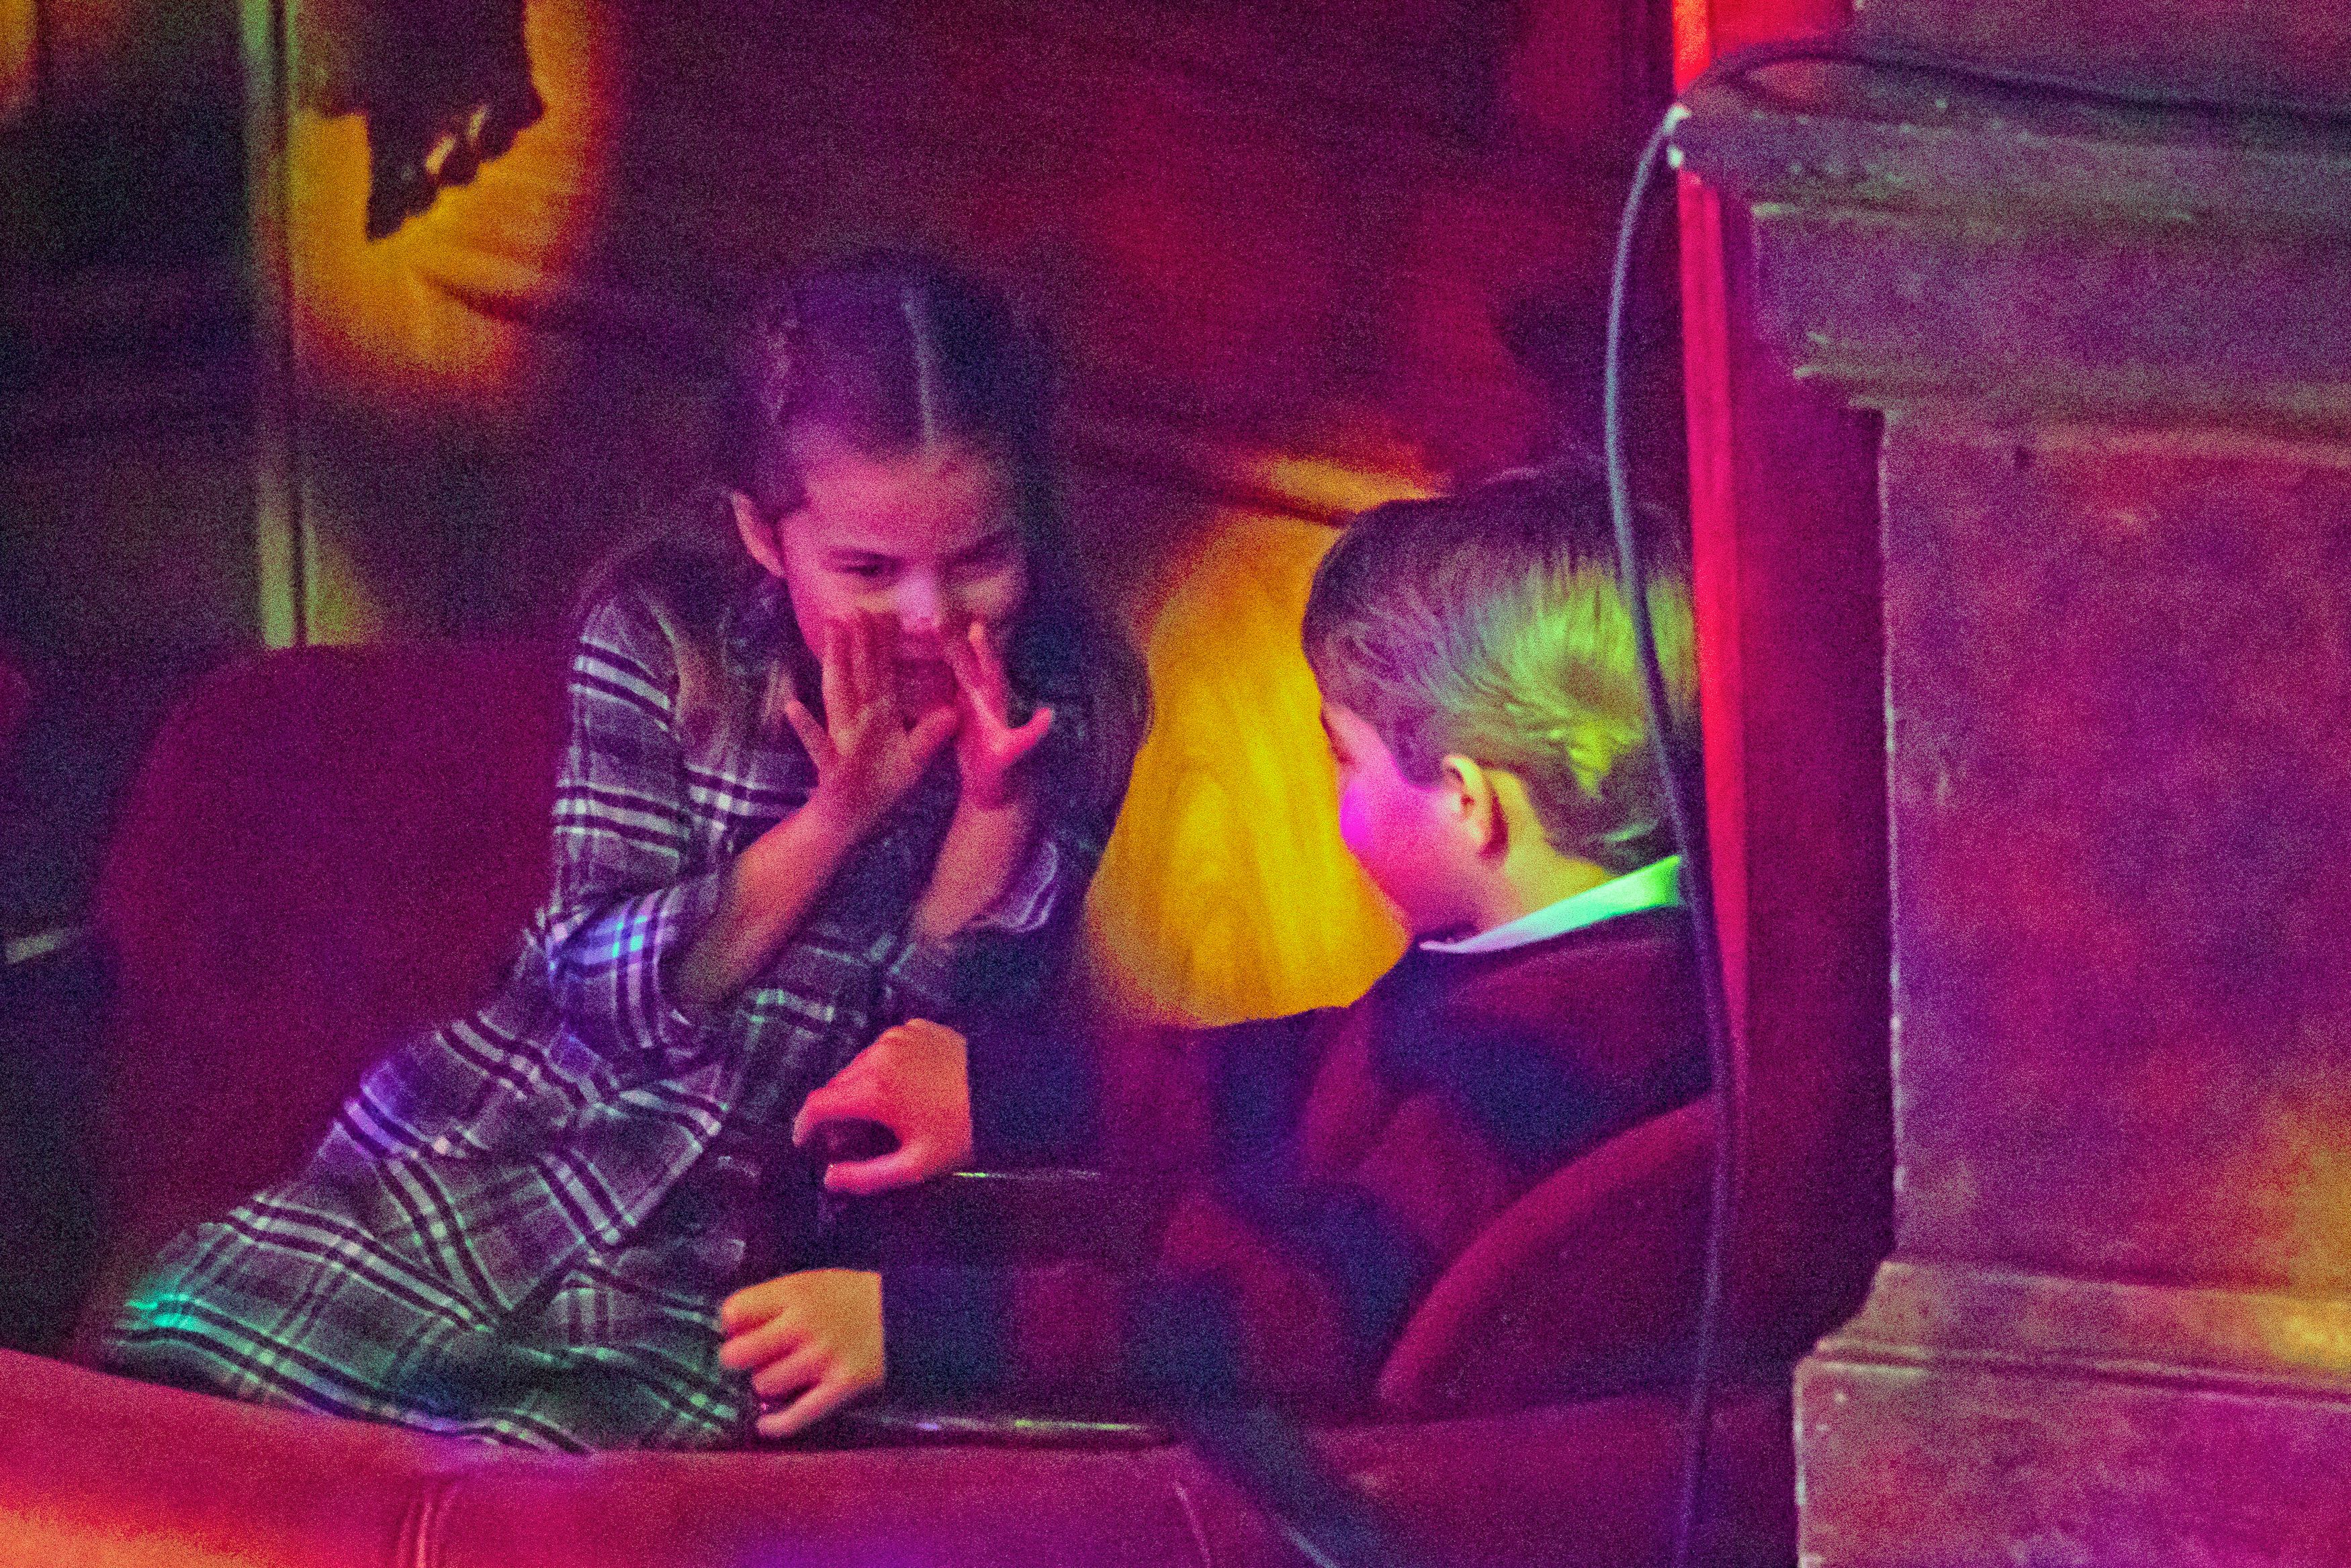 <p>Princess Charlotte whispered to big brother George in their box at a Dec. 11, 2020, pantomime performance at London's Palladium Theatre hosted by The National Lottery to thank key workers and their families for their efforts throughout <a href="https://www.wonderwall.com/celebrity/photos/stars-diagnosed-with-covid-19-428711.gallery">the COVID-19 pandemic</a>. </p>